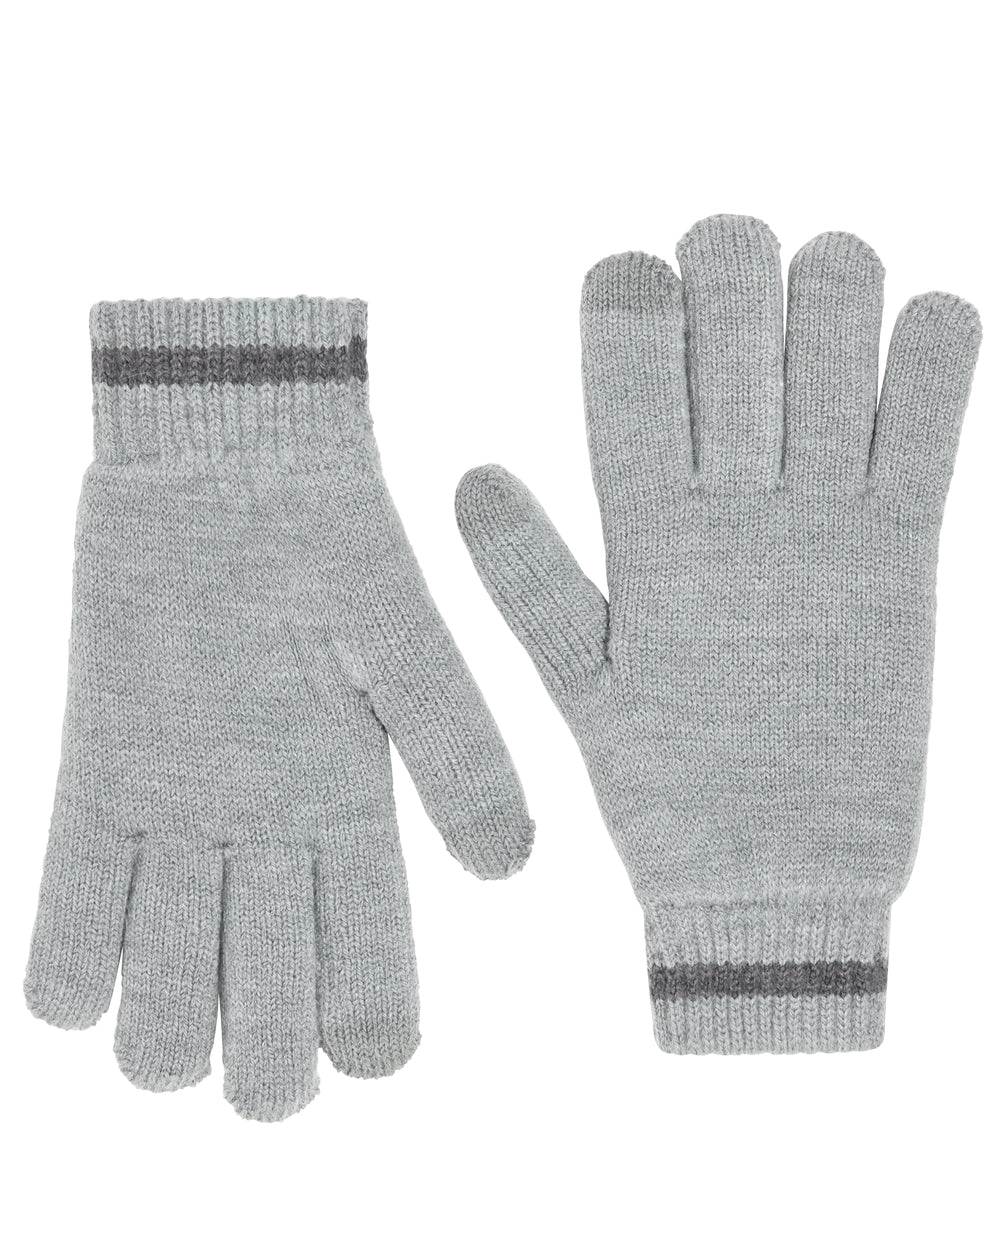 Charcoal Ben - Gloves Knit Sherman - Chenille-Lined